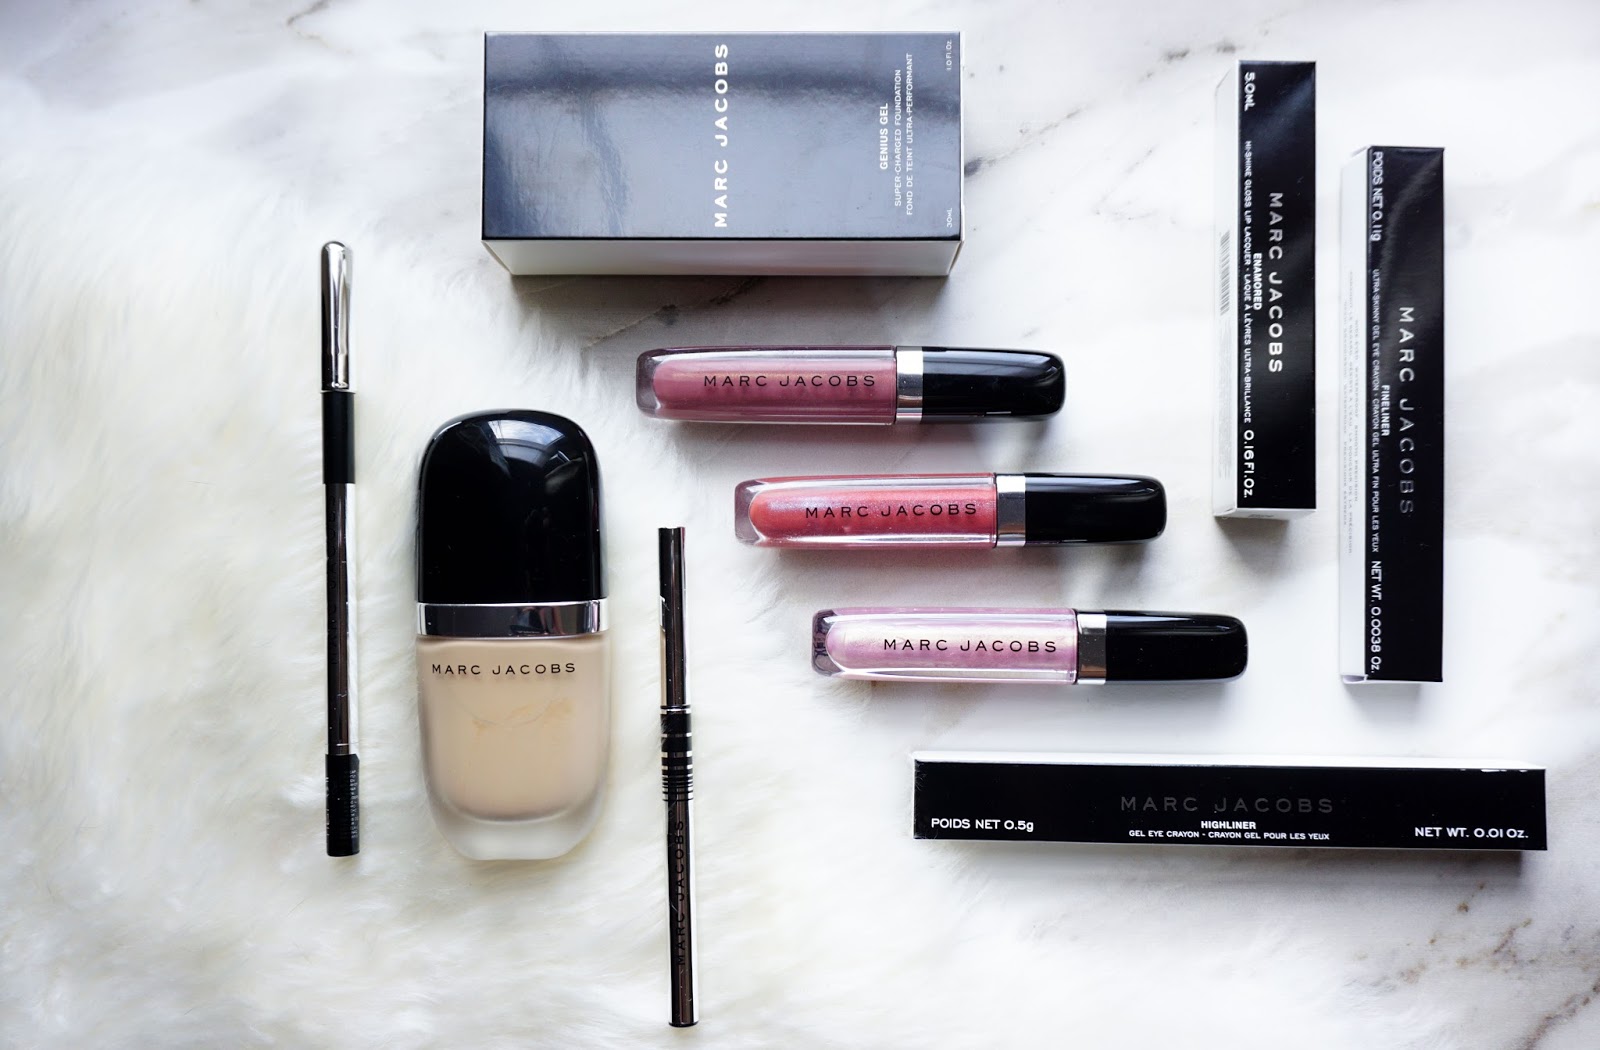 Fivetwo Beauty Marc Jacobs Beauty Haul Review